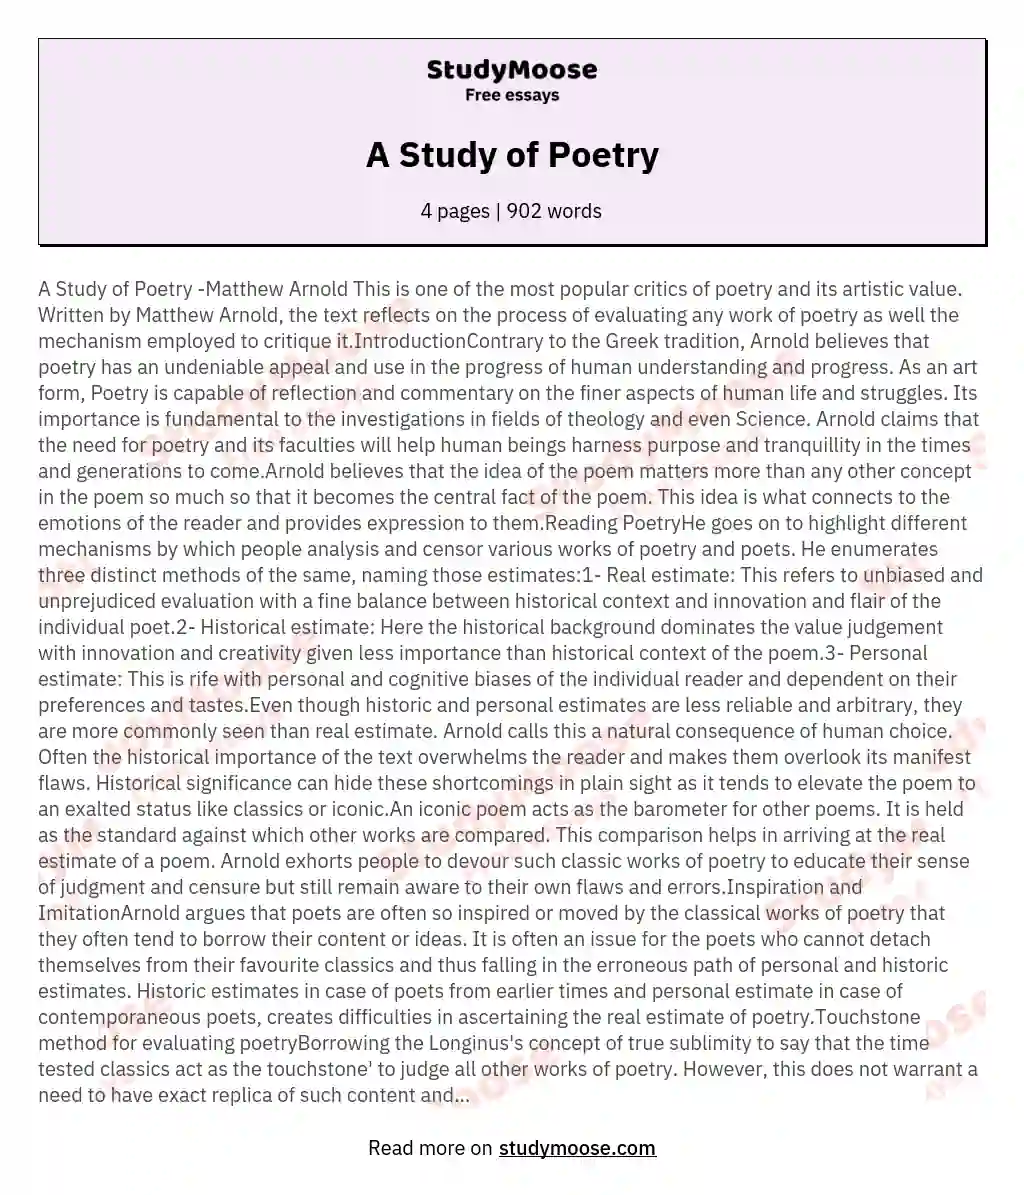 A Study of Poetry essay